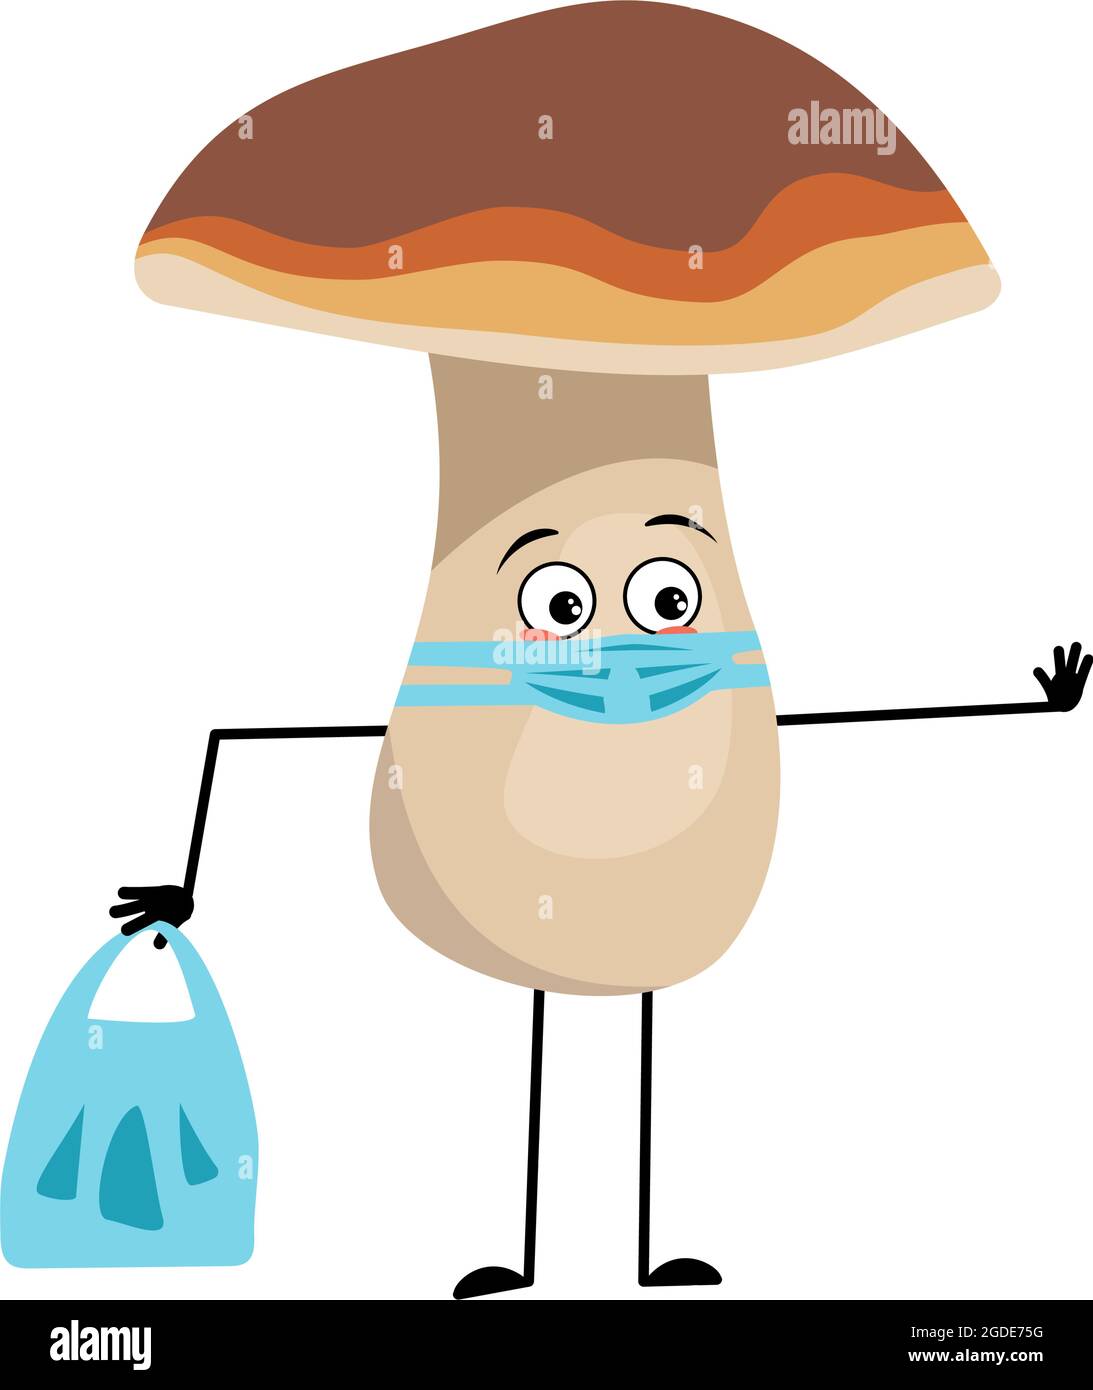 Cute mushroom character with sad emotions, face and mask keep distance, hands with shopping bag and stop gesture. A funny healthy wholesome food, forest plant Stock Vector